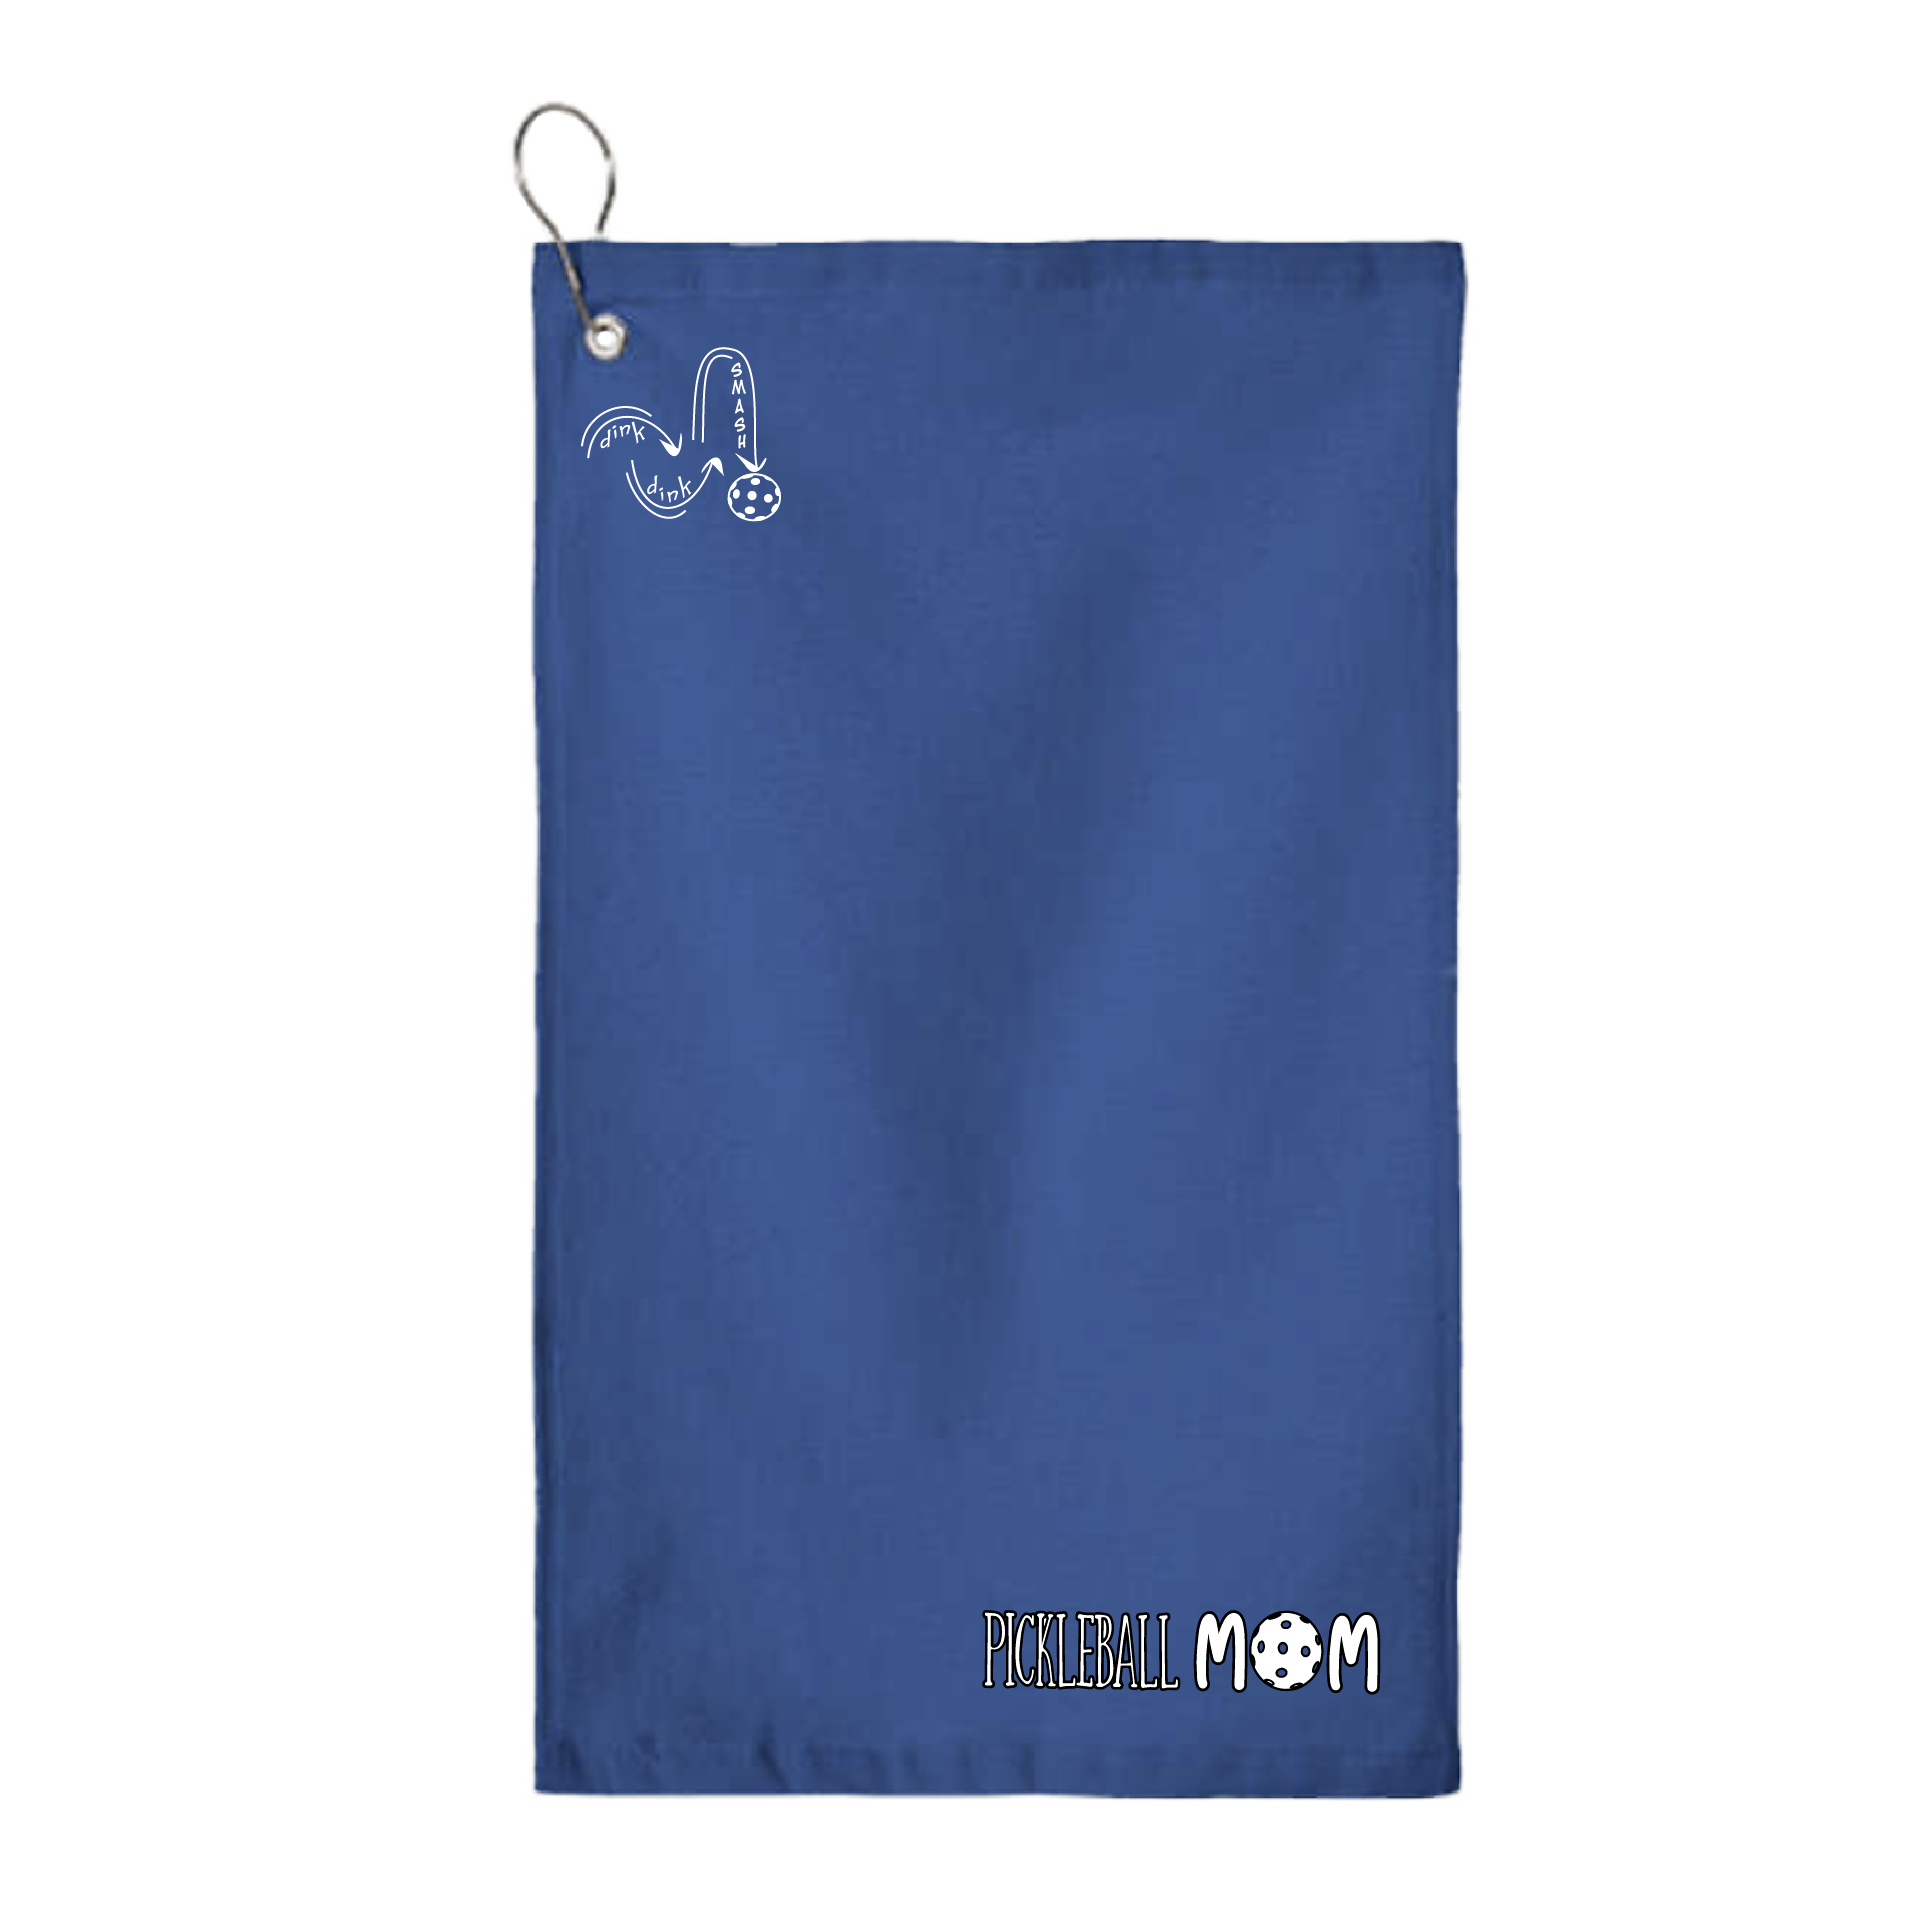 This Pickleball Mom towel is crafted with cotton terry velour for optimal performance. It features grommets, hooks, and hemmed edges for added durability. It's perfect for completing your pickleball gear, and an ideal gift for friends and tournaments. The towel is designed to be both absorbent and lightweight, so you can remain dry and comfortable while you play.